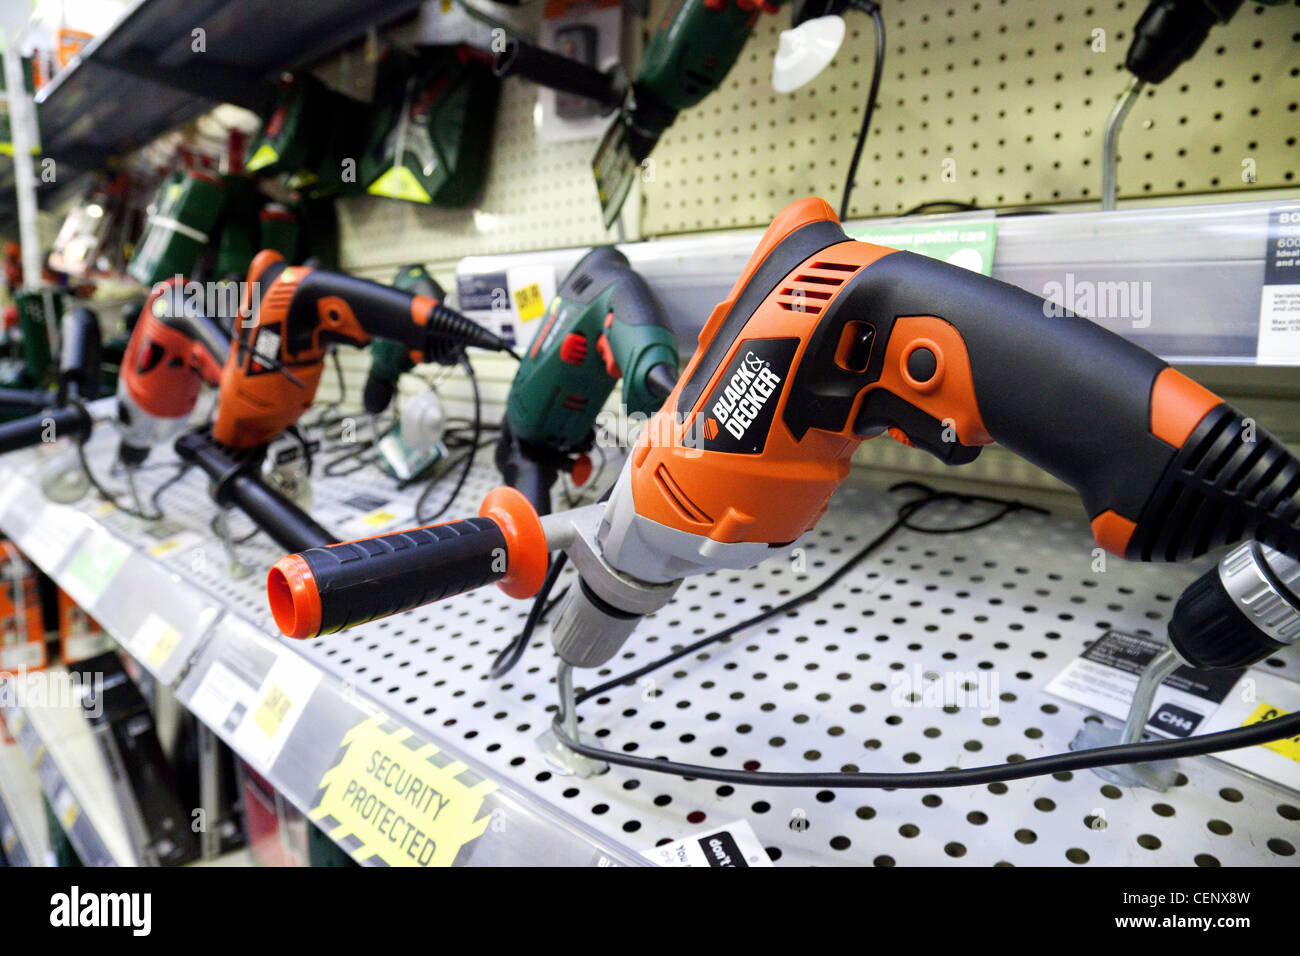 Electrical goods for sale UK; Black & Decker power tools for sale in a hardware store, Homebase UK Stock Photo